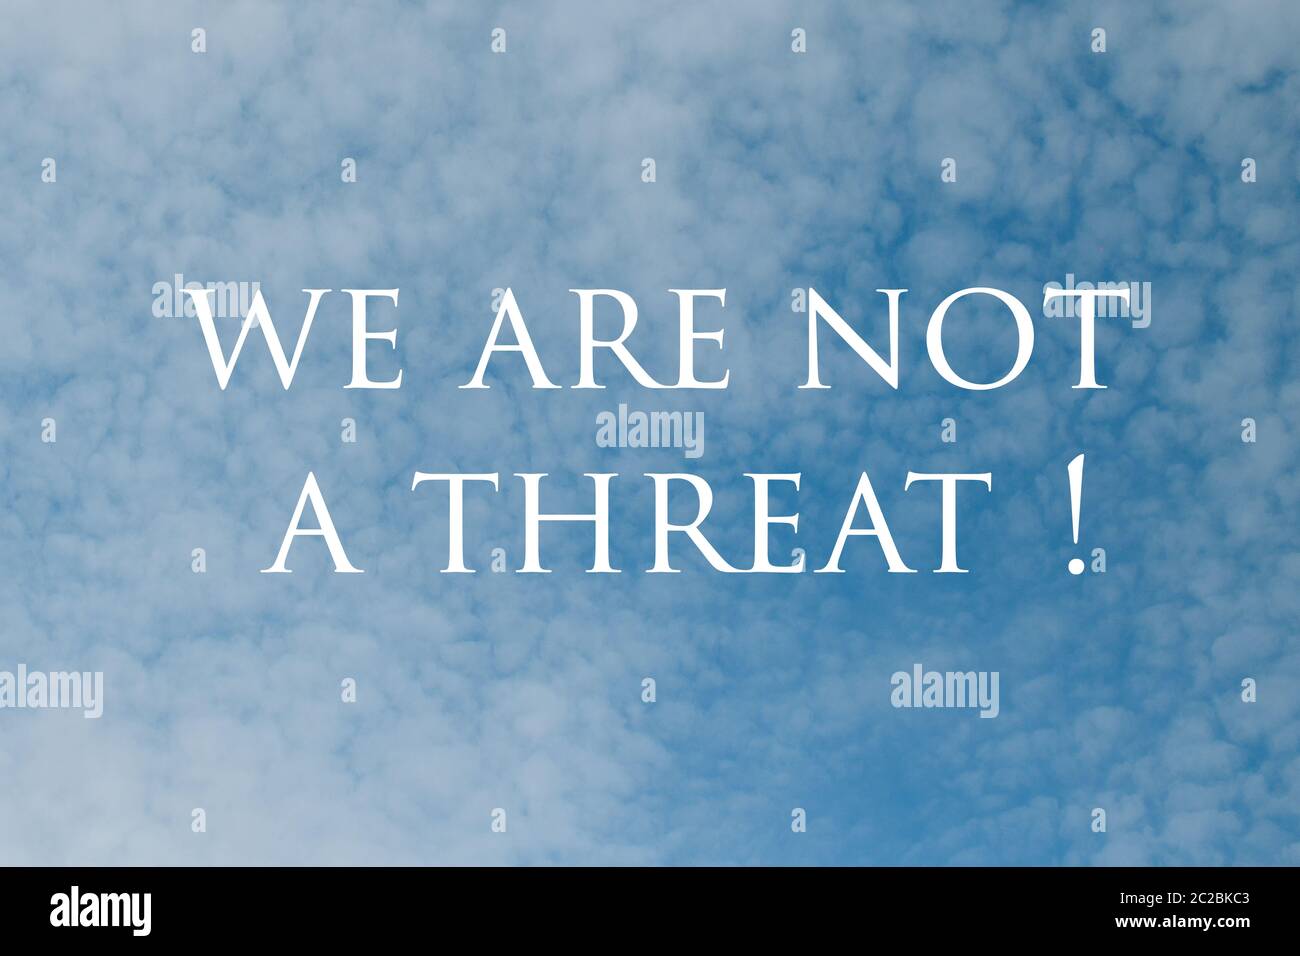 No Racism. Stop Racism. We are not a threat Sign with Dramatic Clouds and Sky. Stock Photo